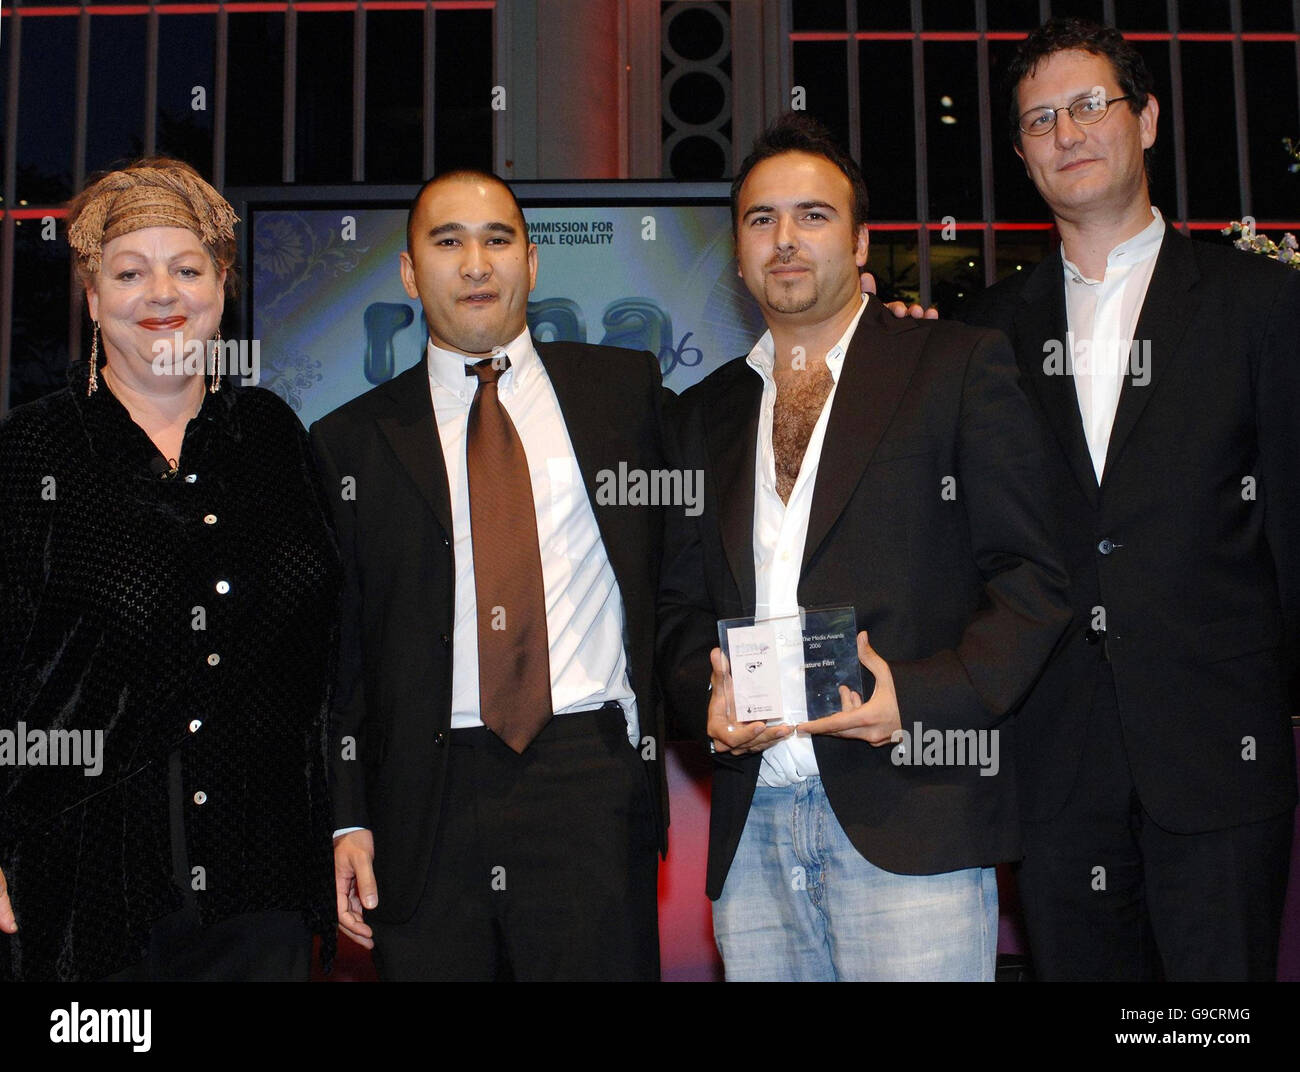 Justin Marciano, second right, and Tom Clark, second left, collects the Feature Film award for Kidulthood, from John Woodward accompanied by comedienne and ceremony presenter Jo Brand, at the Commission for Racial Equality's Race In The Media Awards 2006 at London's Royal Opera House. Stock Photo